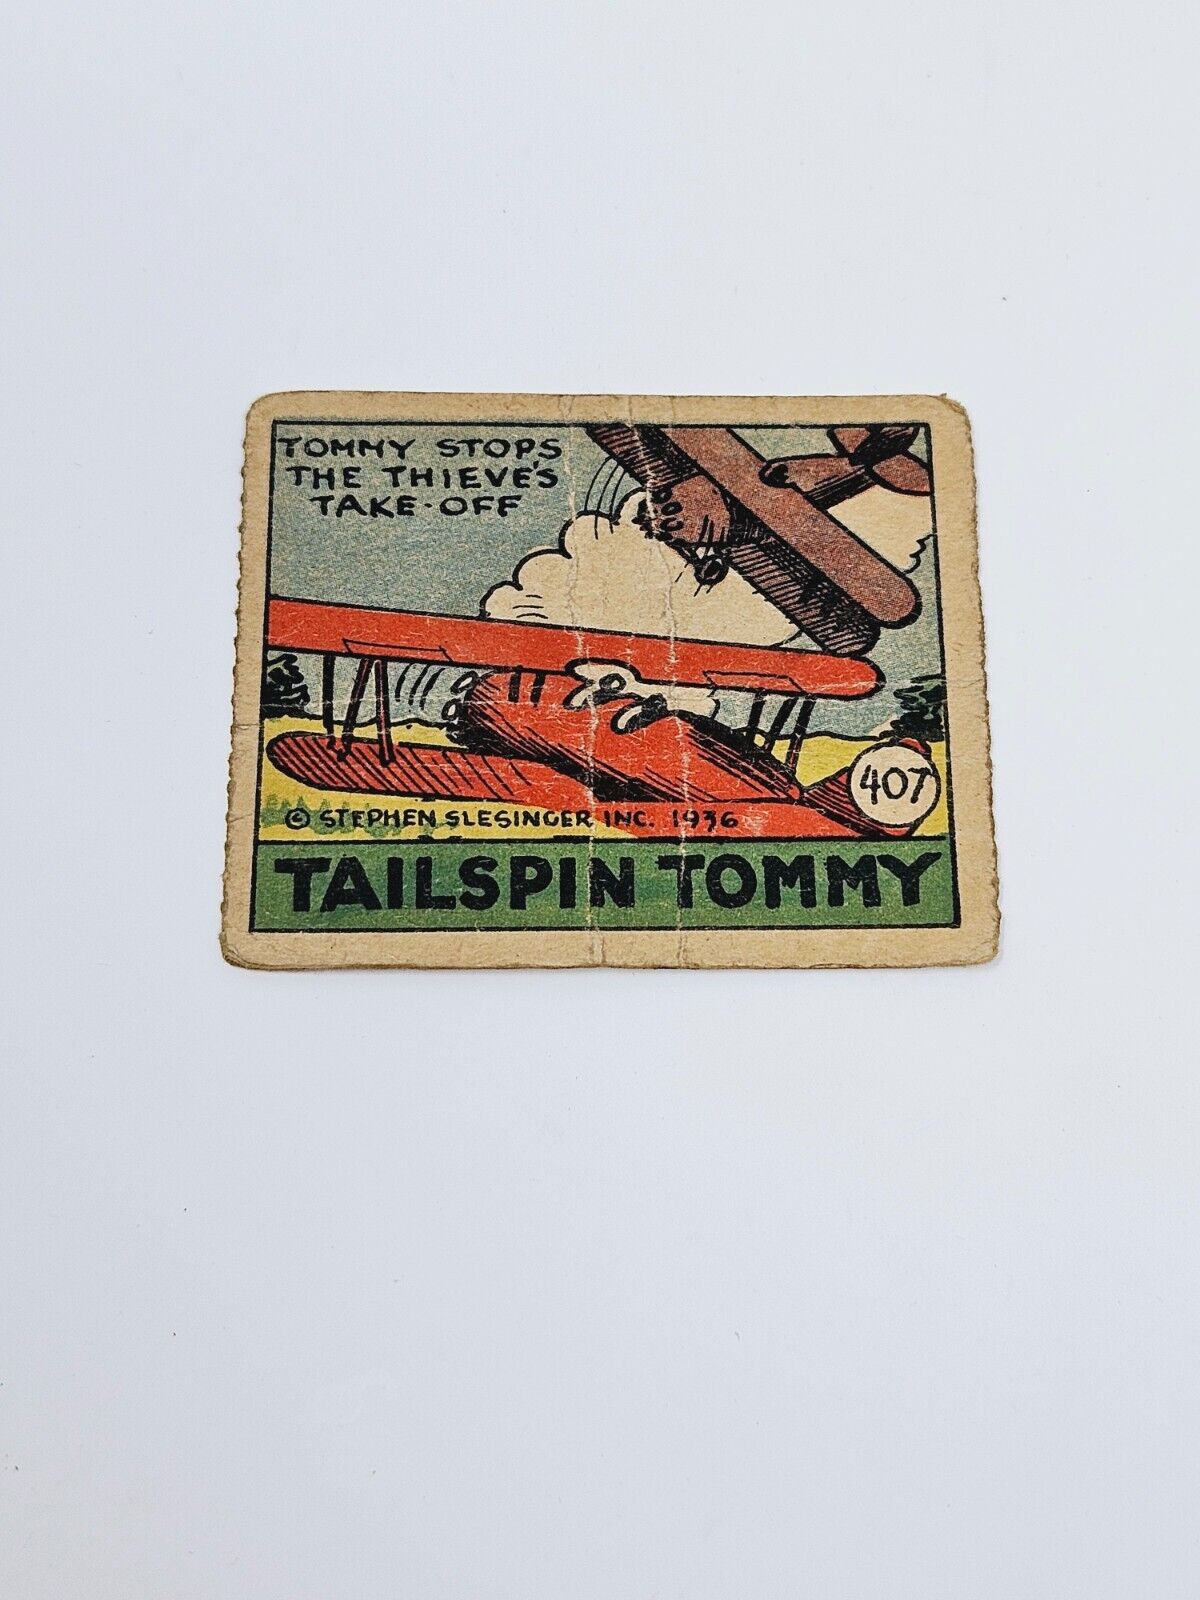 1936 TAILSPIN TOMMY 407 JEWELS CHRIS BENJAMIN PRICE GUIDE PUBLISHED CARD 